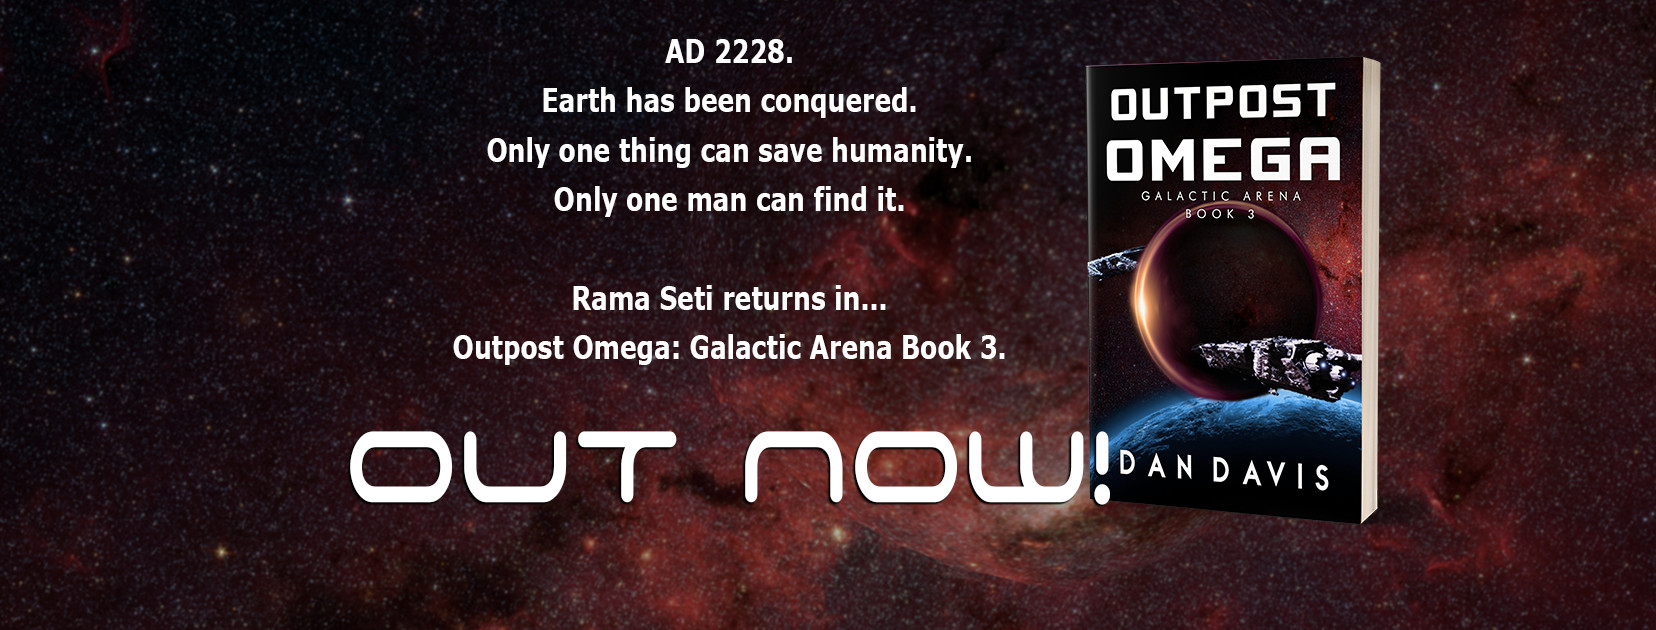 New Release – Outpost Omega is OUT NOW!